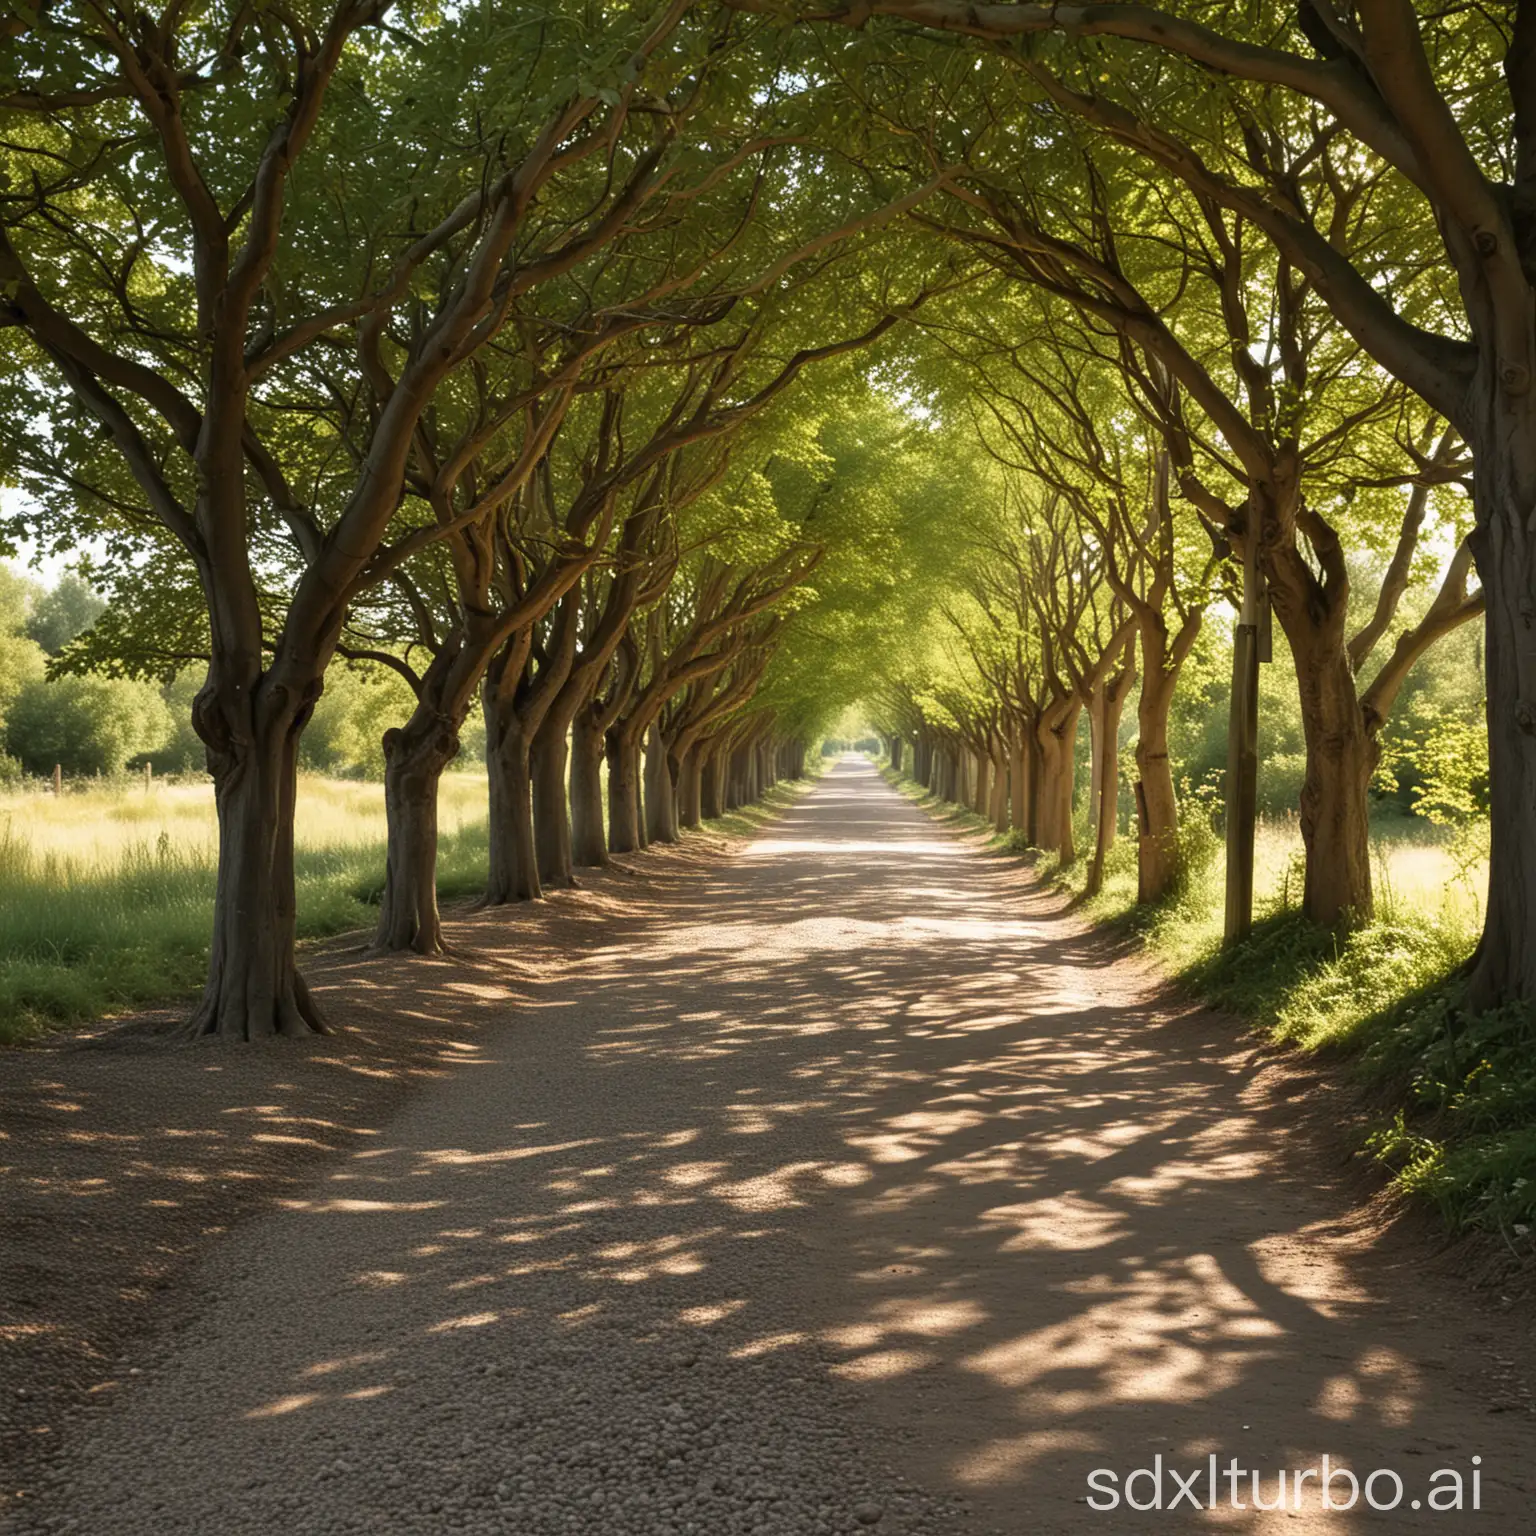 Sunlit-Tree-Tunnel-Path-in-a-Tranquil-Forest